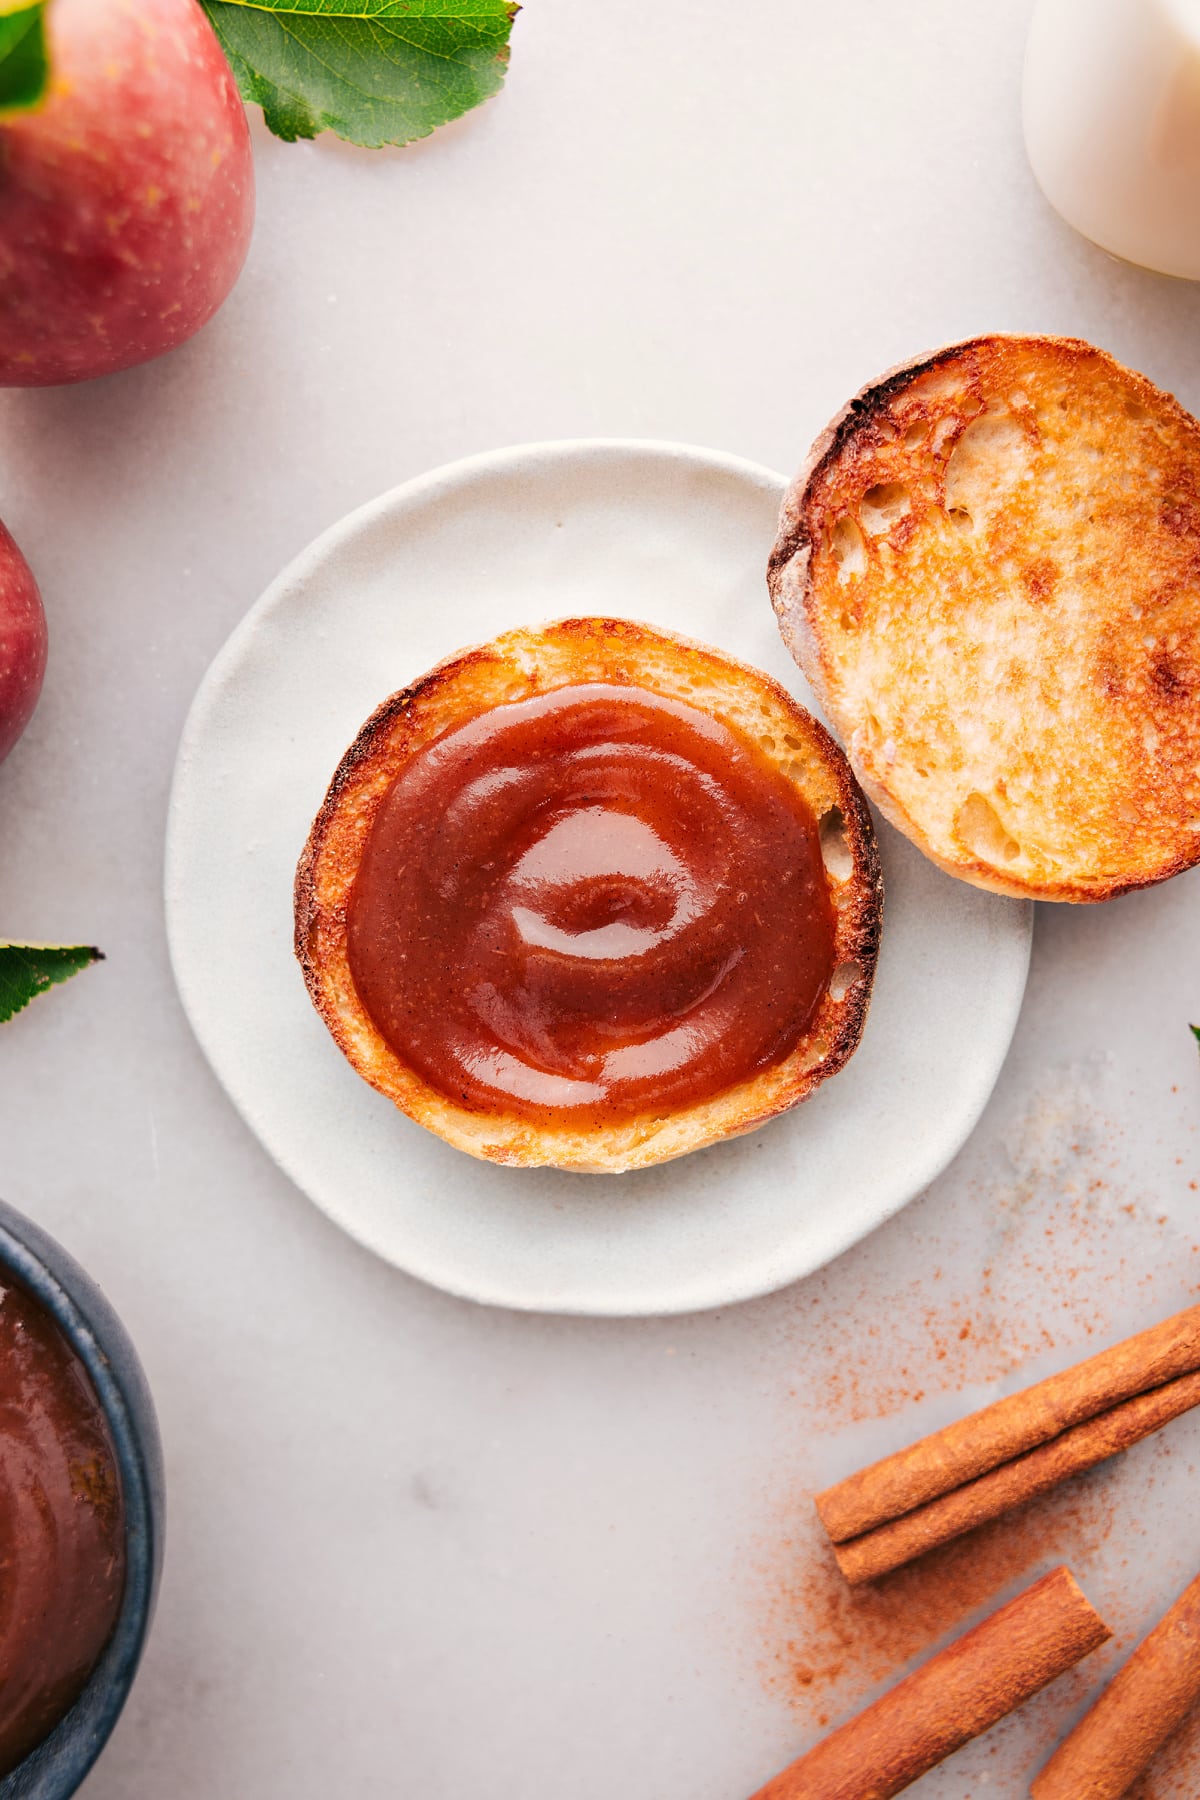 Thick spread of apple butter atop a golden slice of toast.